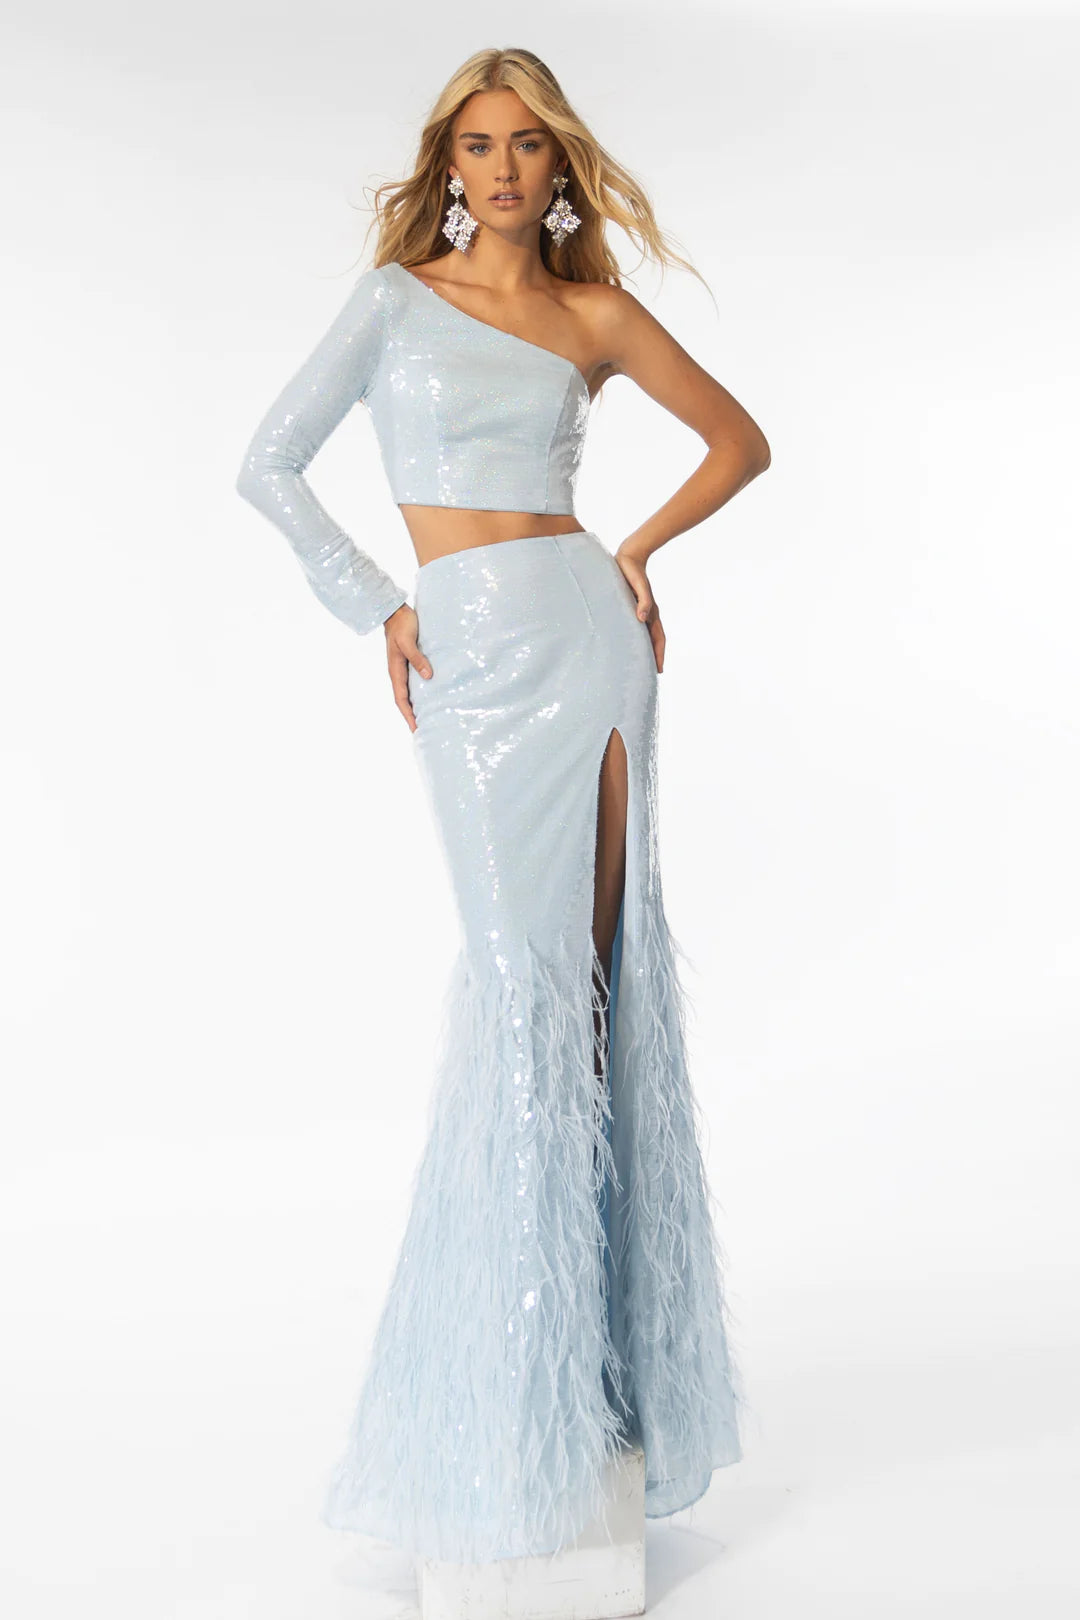 Elevate your formal look with the Ava Presley 39243 Long Prom 2pcs Sequin Dress. Featuring a one-sleeve design and a feather detail skirt, this dress exudes elegance and sophistication. The sequin embellishments add a touch of glamour, making it perfect for proms, pageants, and other formal events. Stand out in style with this stunning dress.